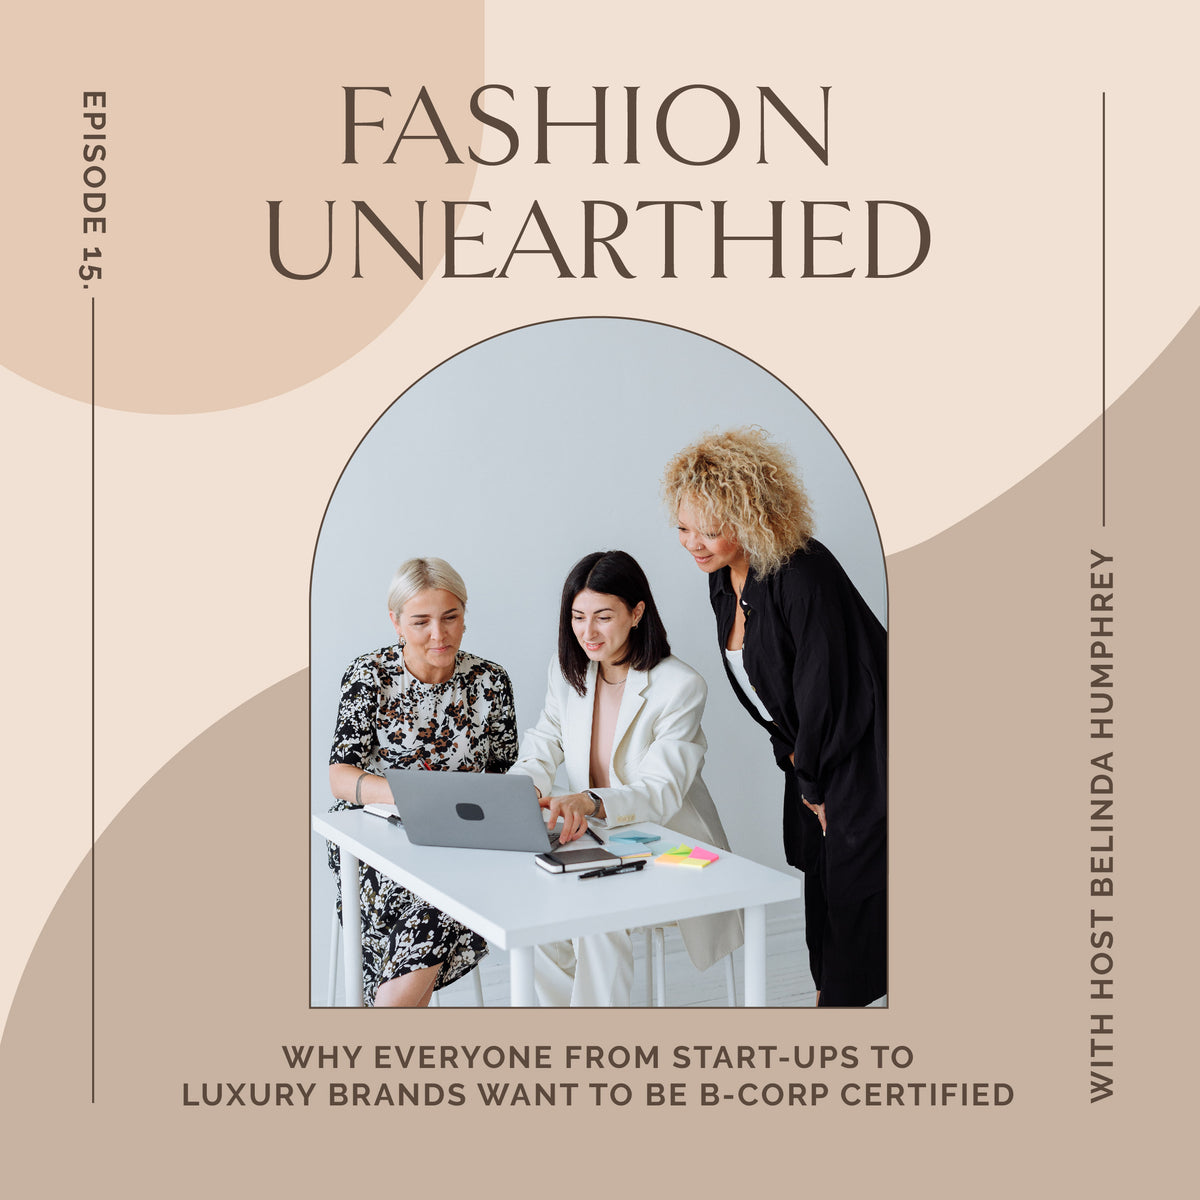 Episode 15: Why Everyone from Start-ups to Luxury Brands want to be B-Corp Certified